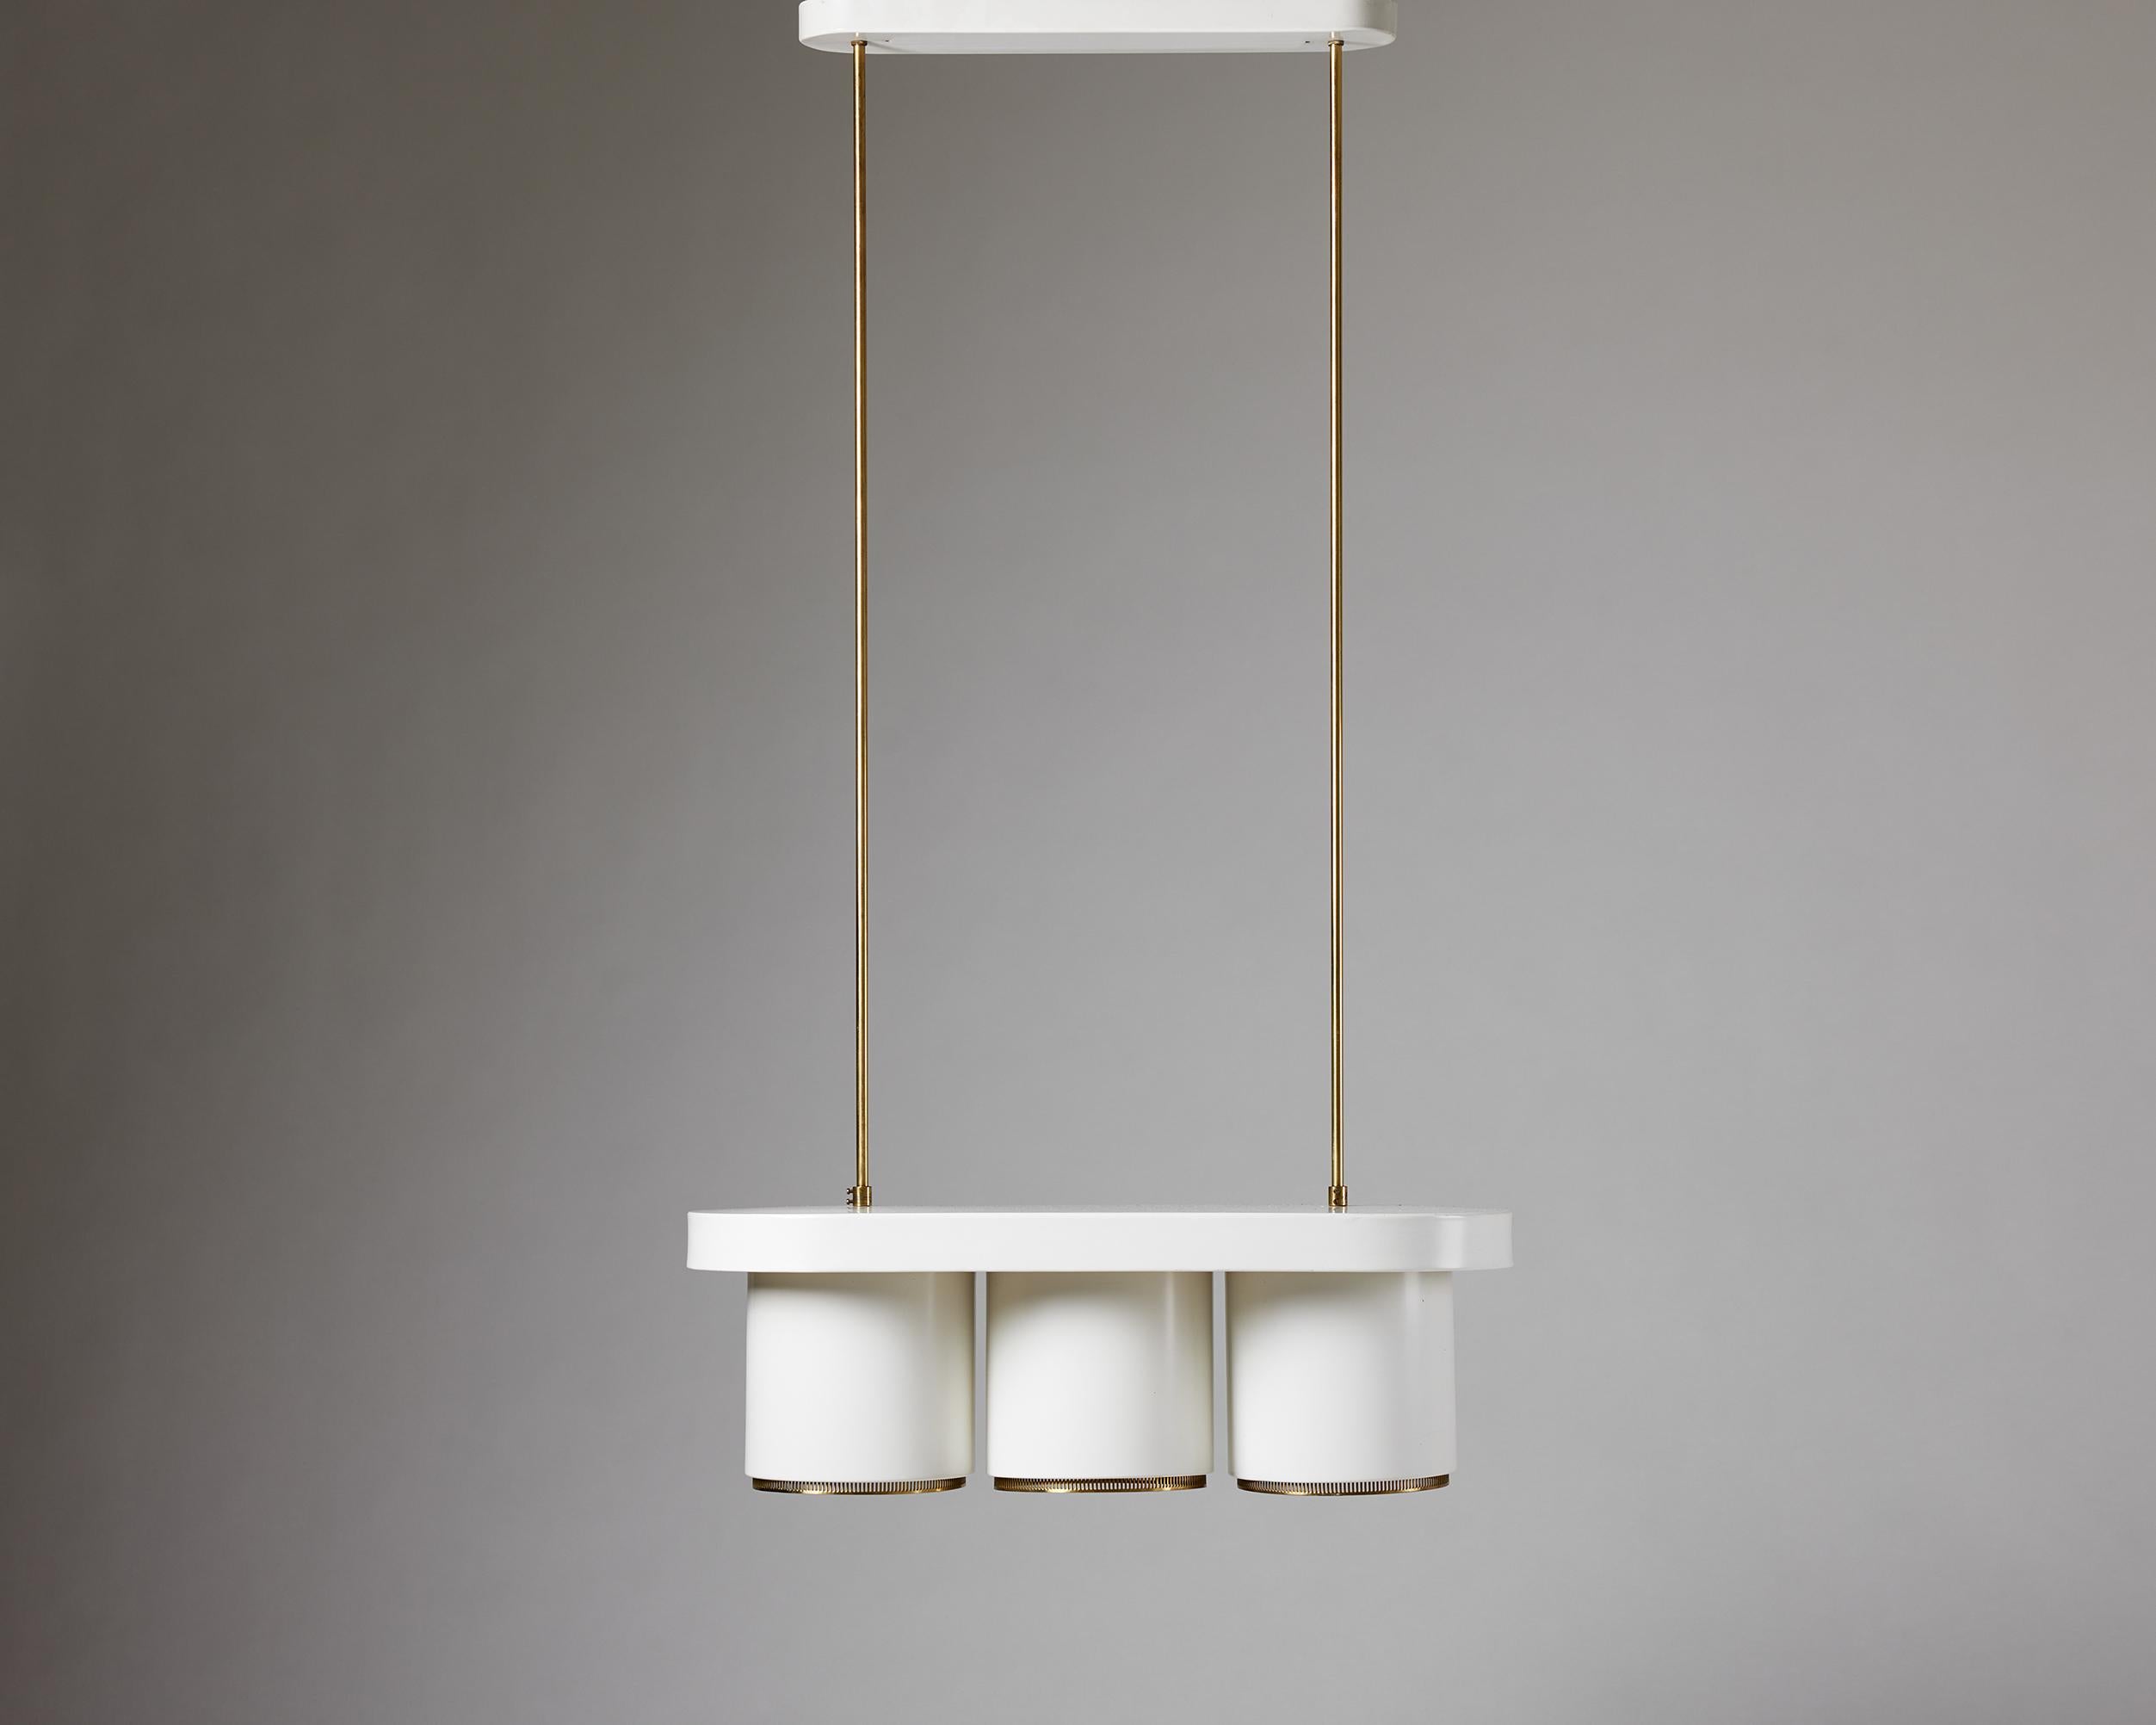 Ceiling lamp, model A203, designed by Alvar Aalto for Valaistustyö,
Finland, 1940s.

Lacquered metal and brass.

H: 123 cm / 4' 1/4''
Height of pendant: 20 cm / 8''
W: 68.5 cm / 2' 3